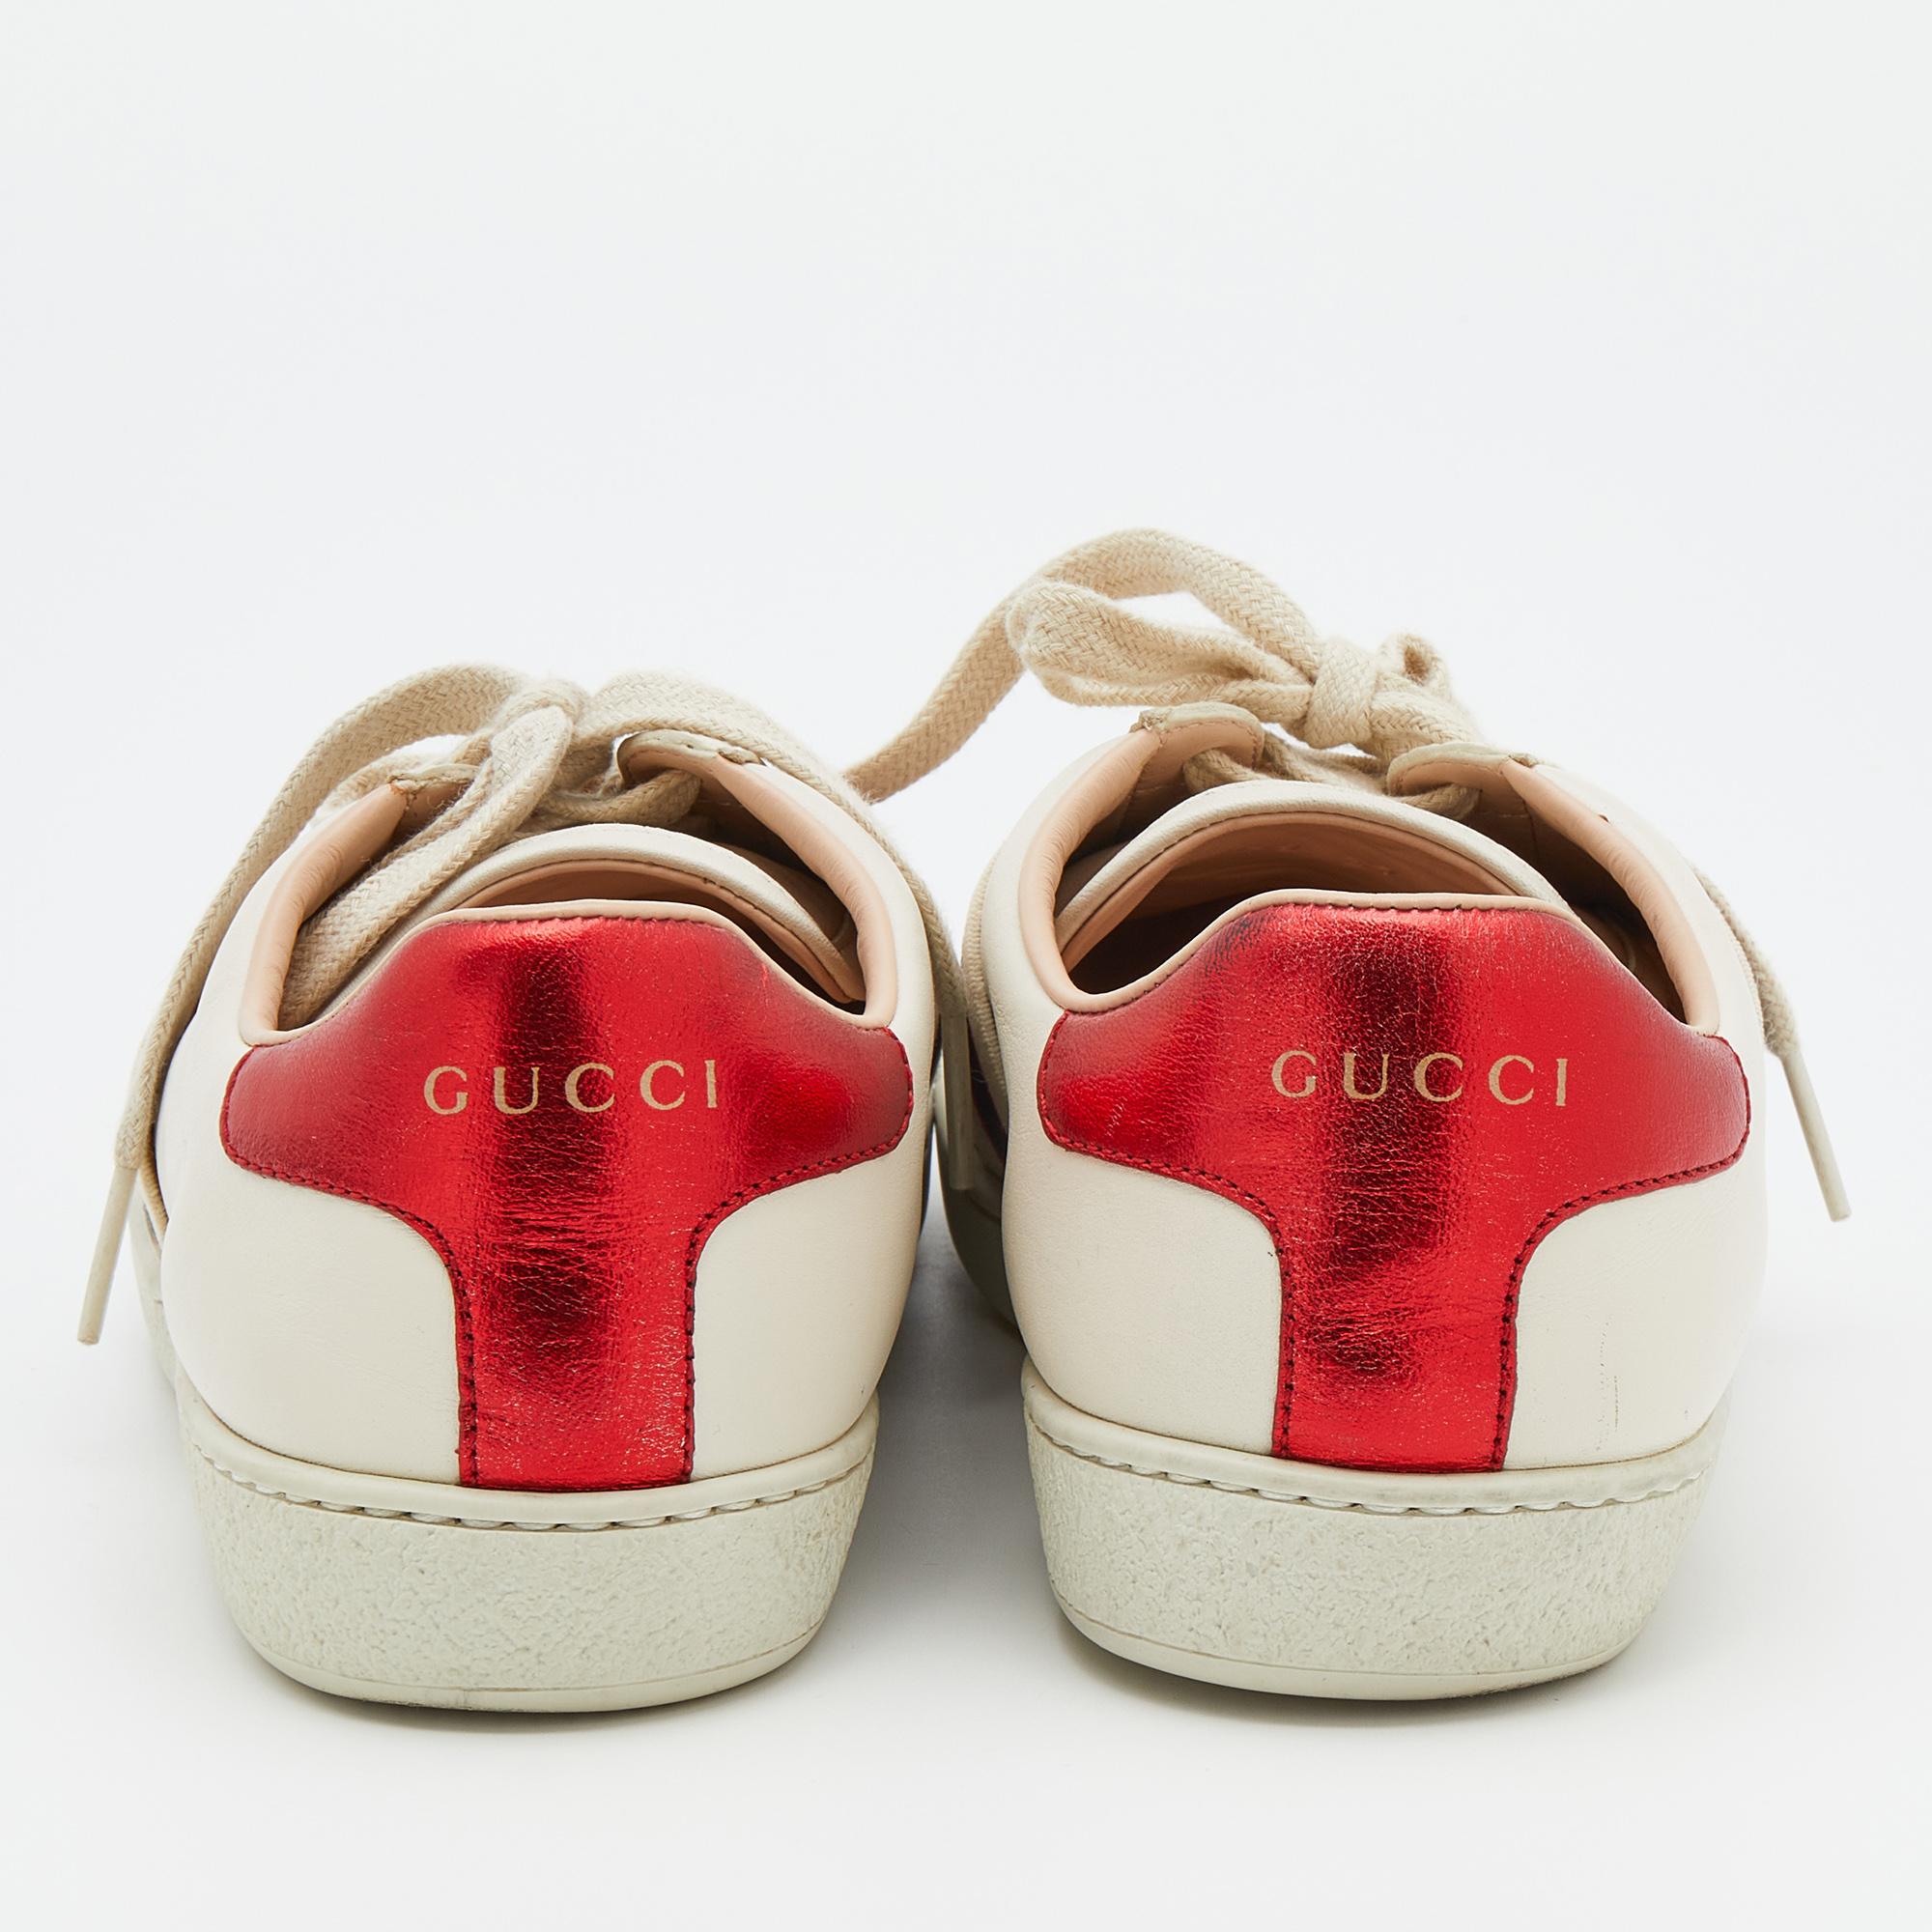 gucci band sneakers